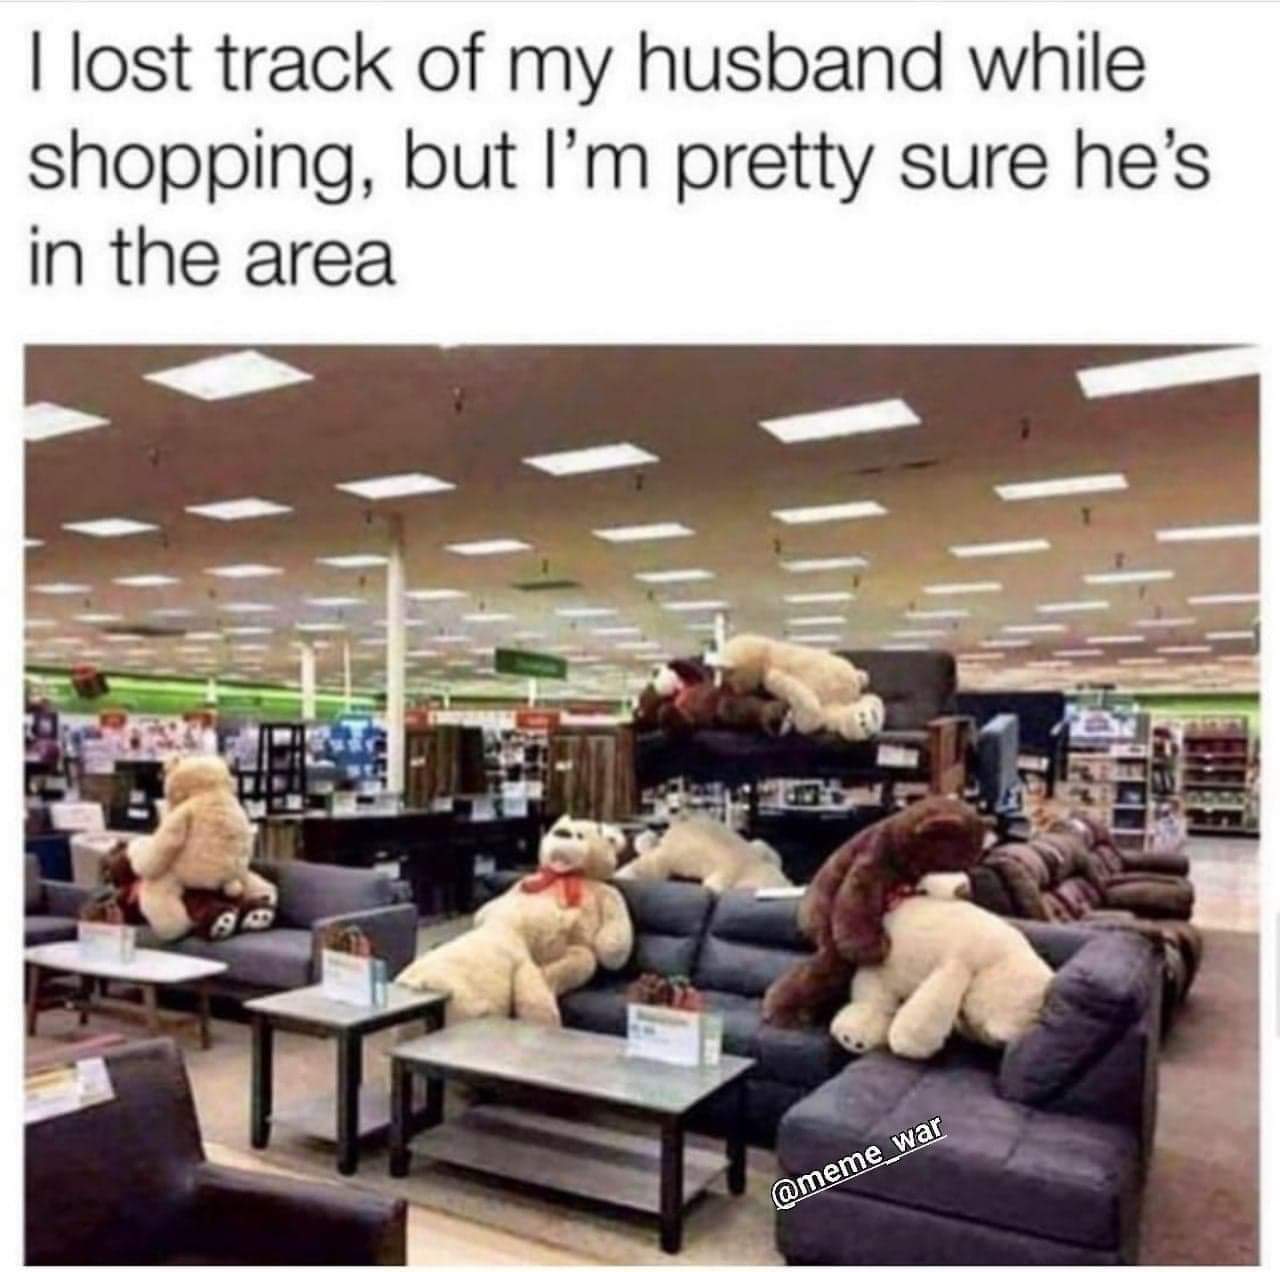 lost track of my husband meme - I lost track of my husband while shopping, but I'm pretty sure he's in the area